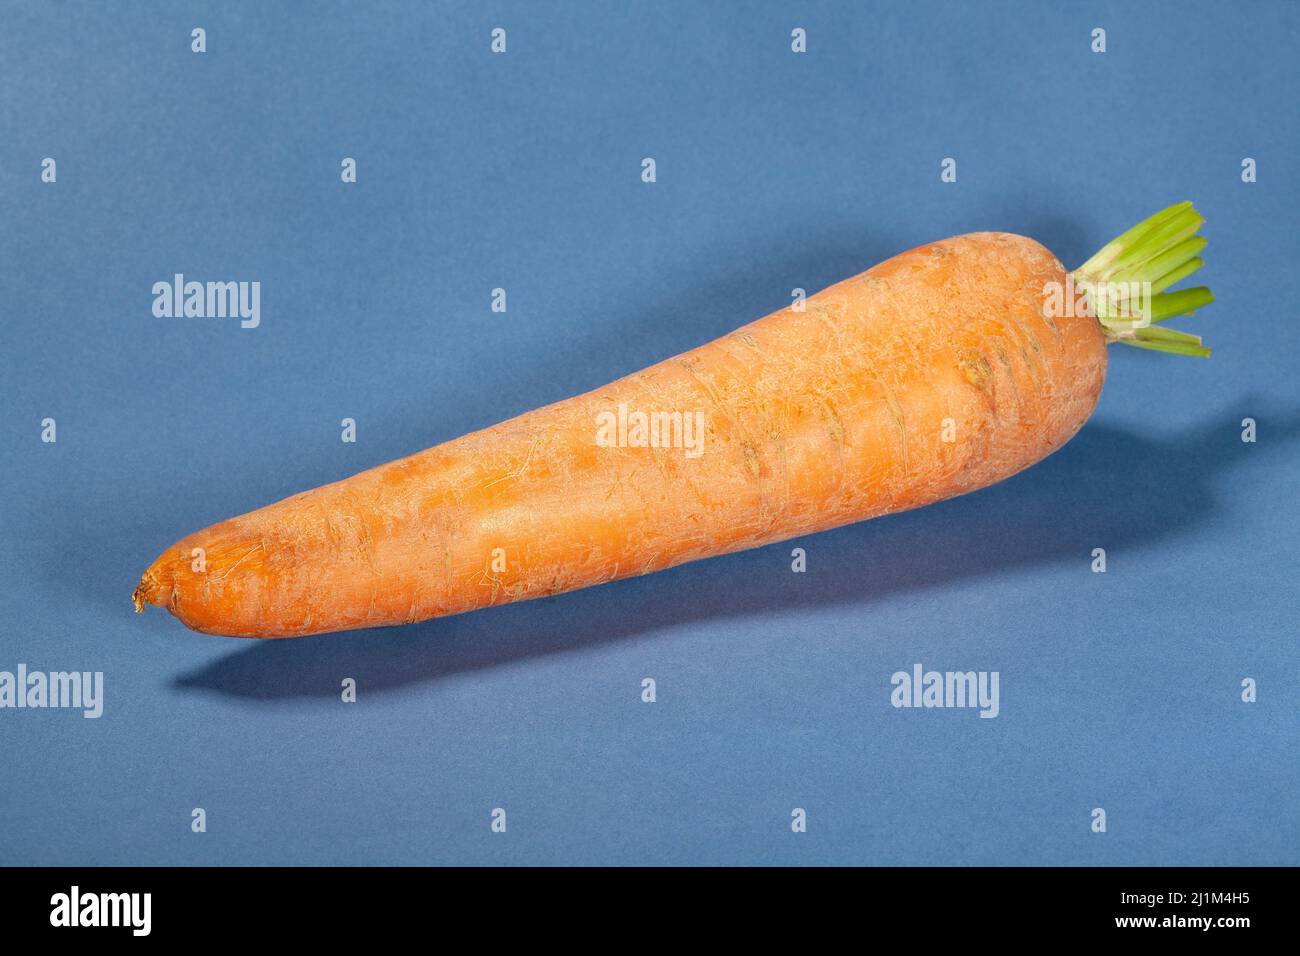 one carrot on blue background Stock Photo